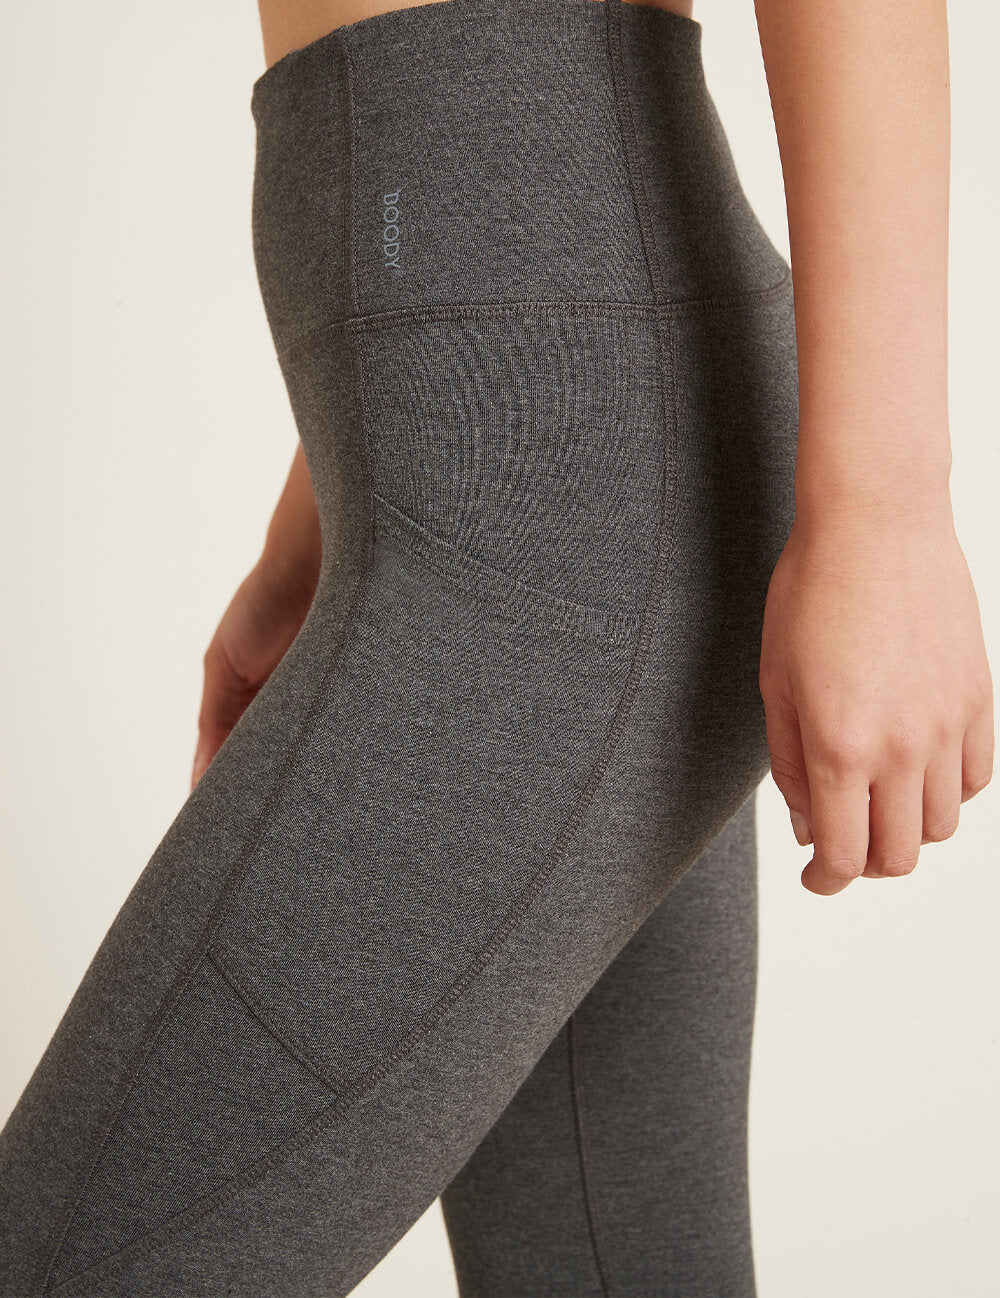 Boody Bamboo Organic Cotton Active Blended High-Waisted Full Leggings with Pocket in Dark Grey Cell Phone Pocket Detail View